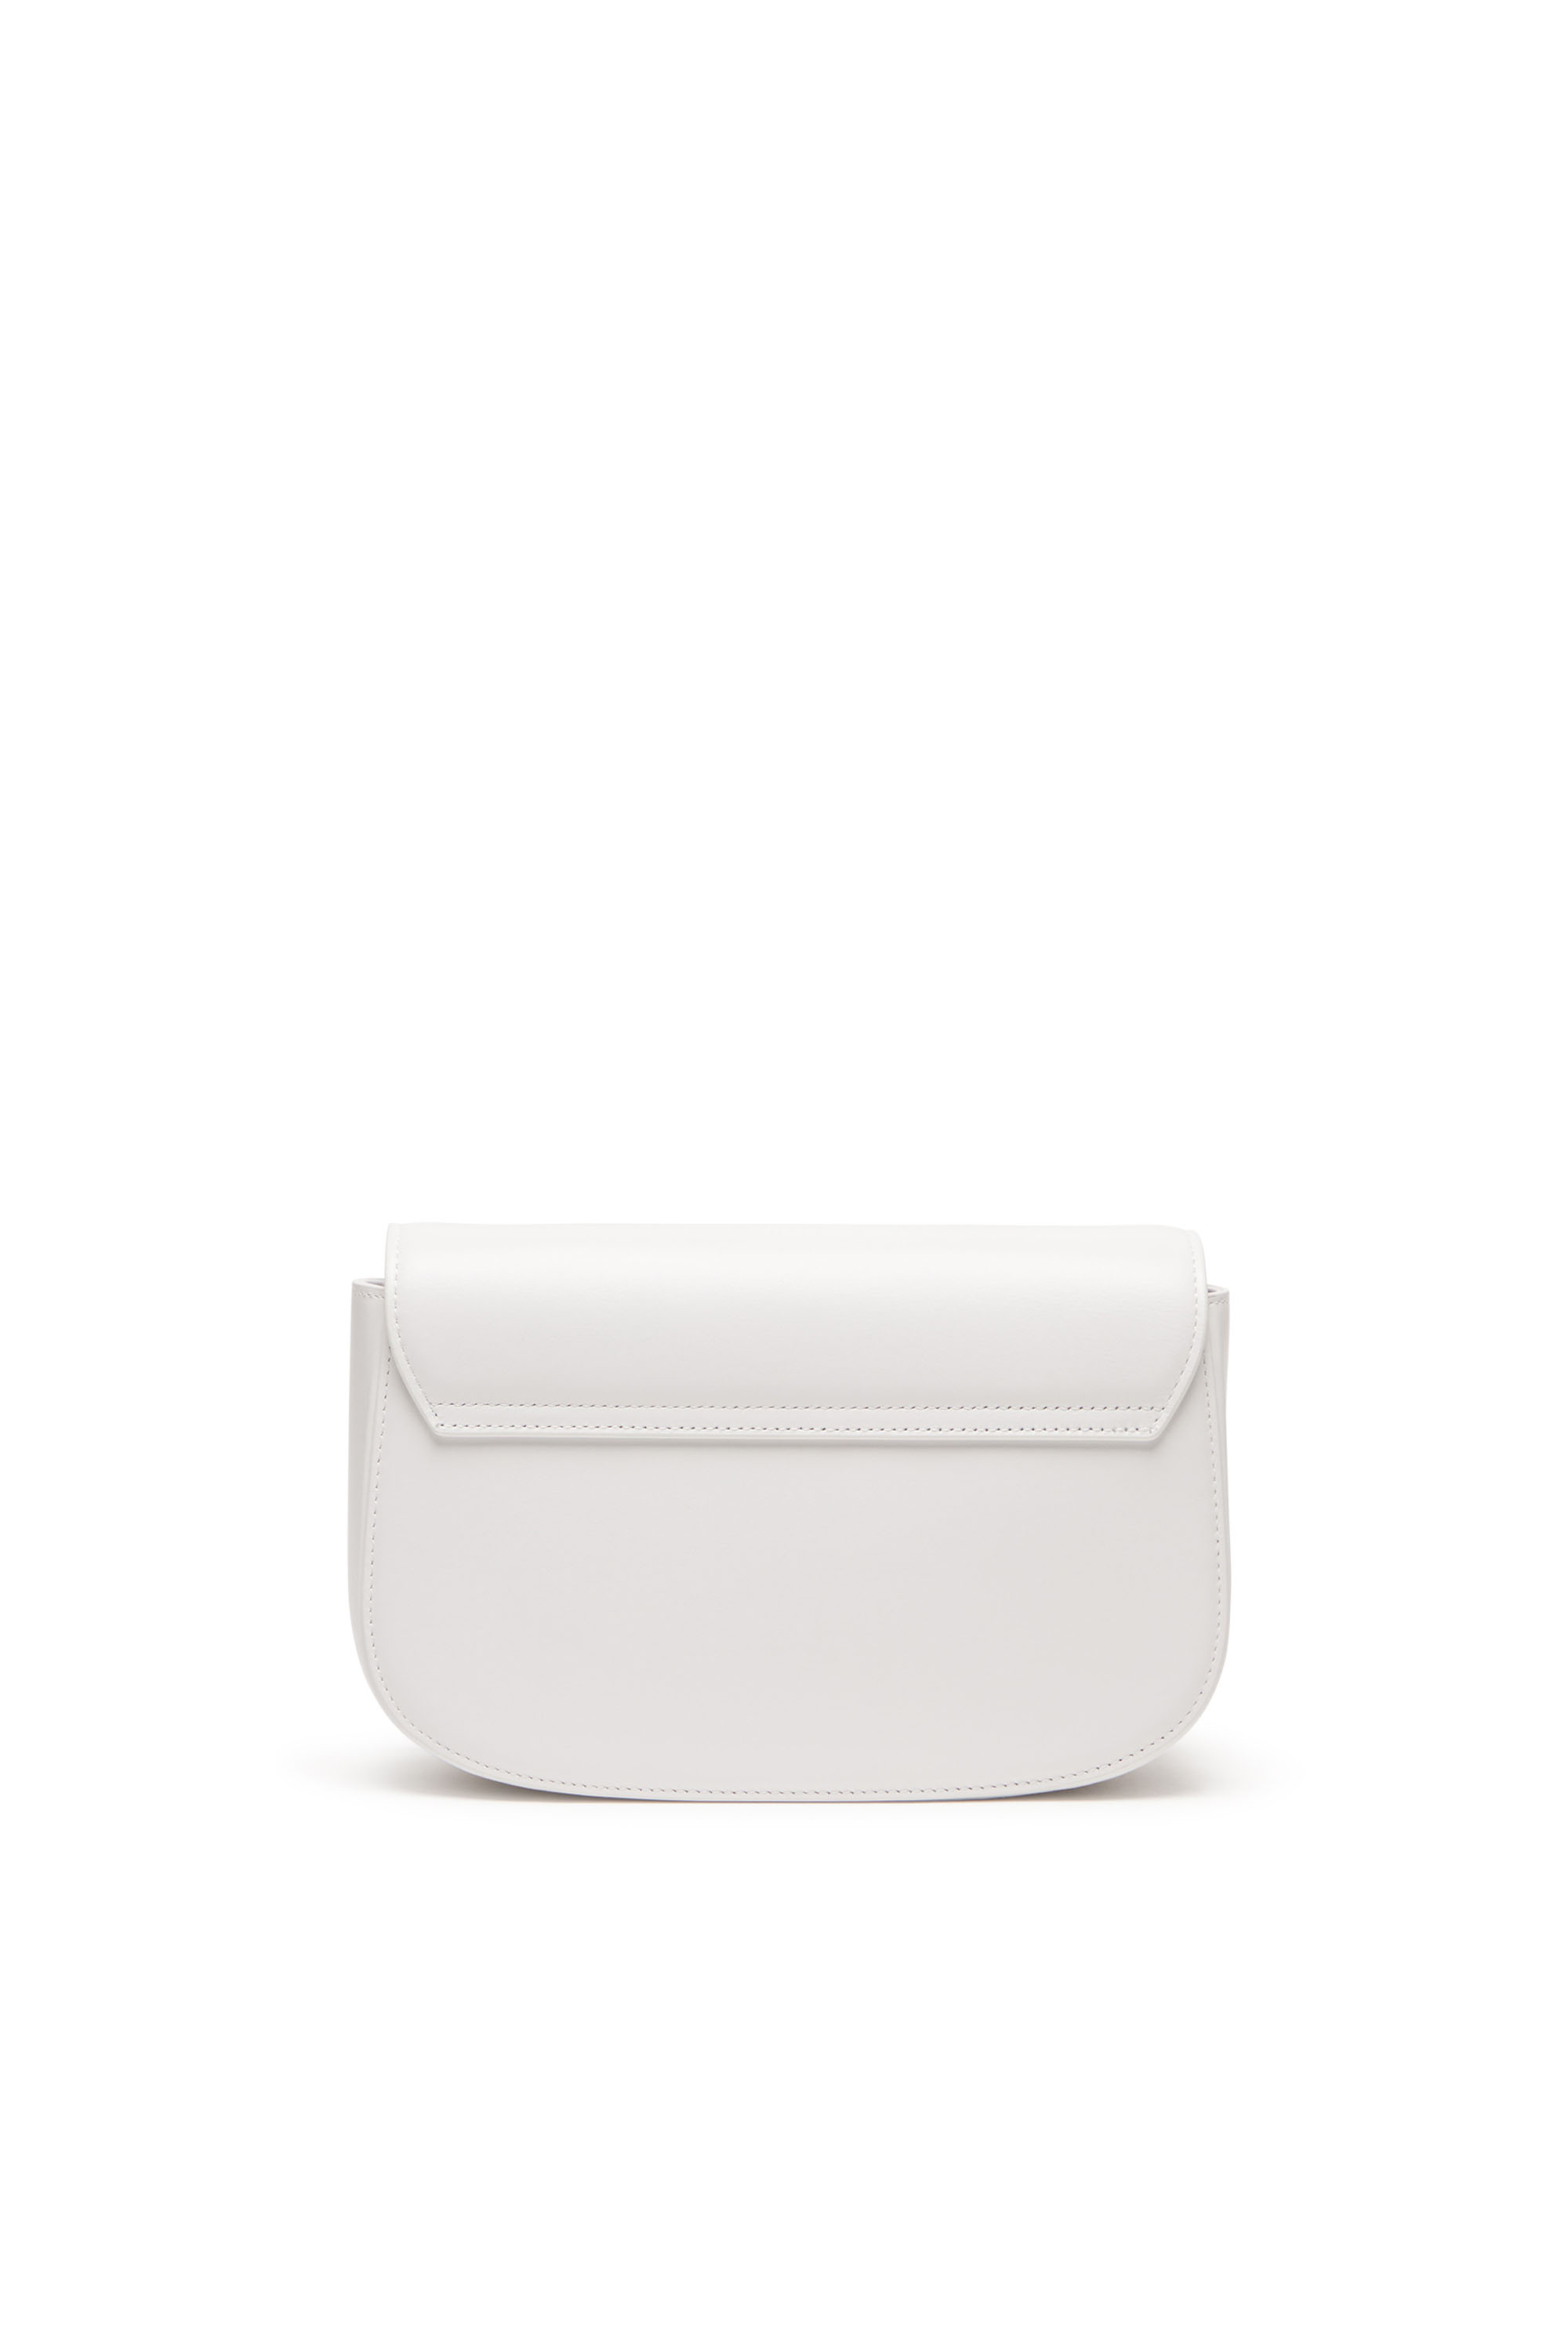 Diesel - 1DR M, Woman 1DR M-Iconic medium shoulder bag in leather in White - Image 2